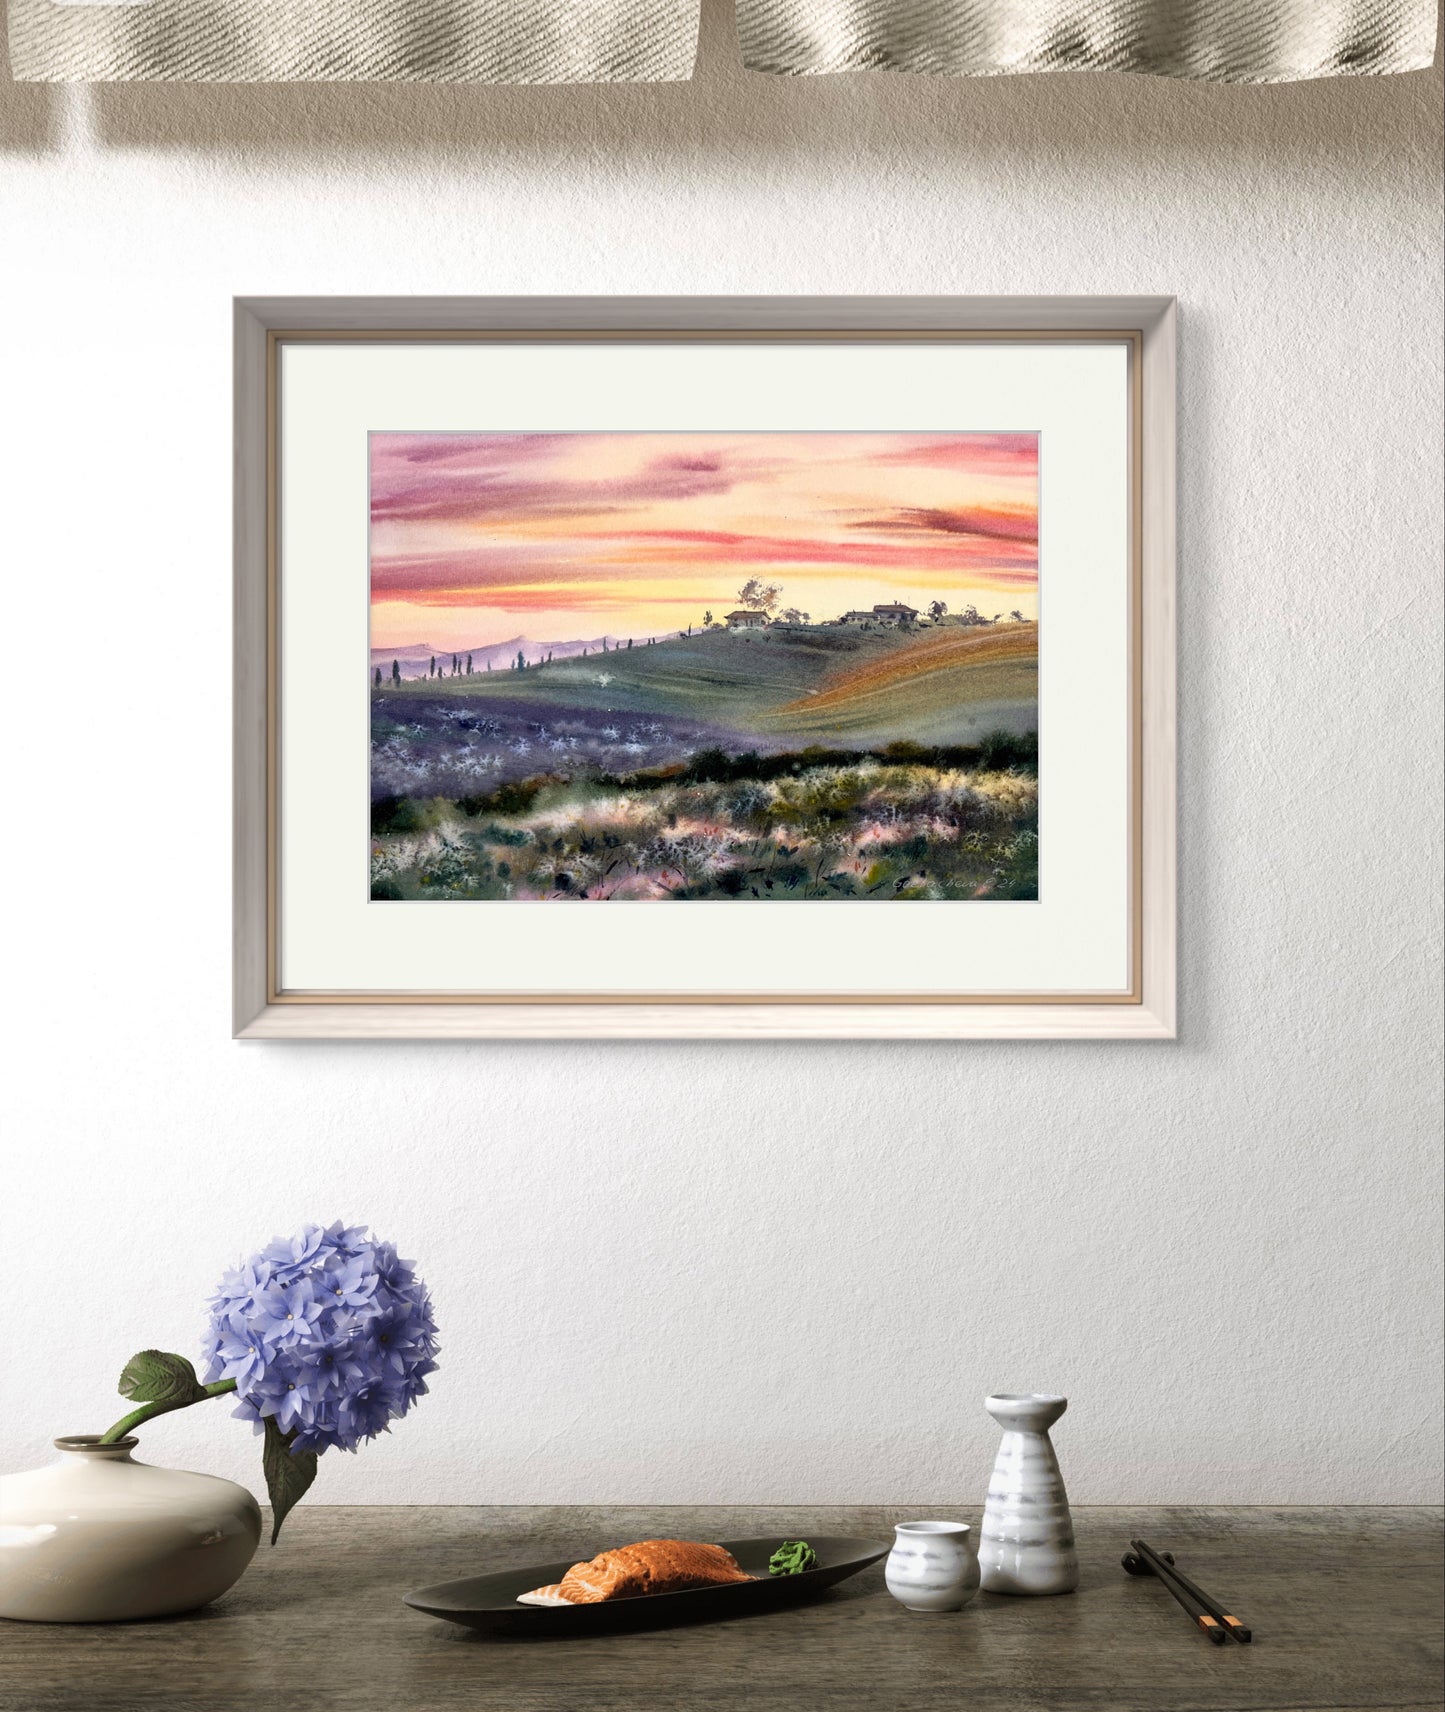 Tuscany Scenery Painting, Vibrant Watercolor Art, Country Wall Decor - Perfect Housewarming Gift